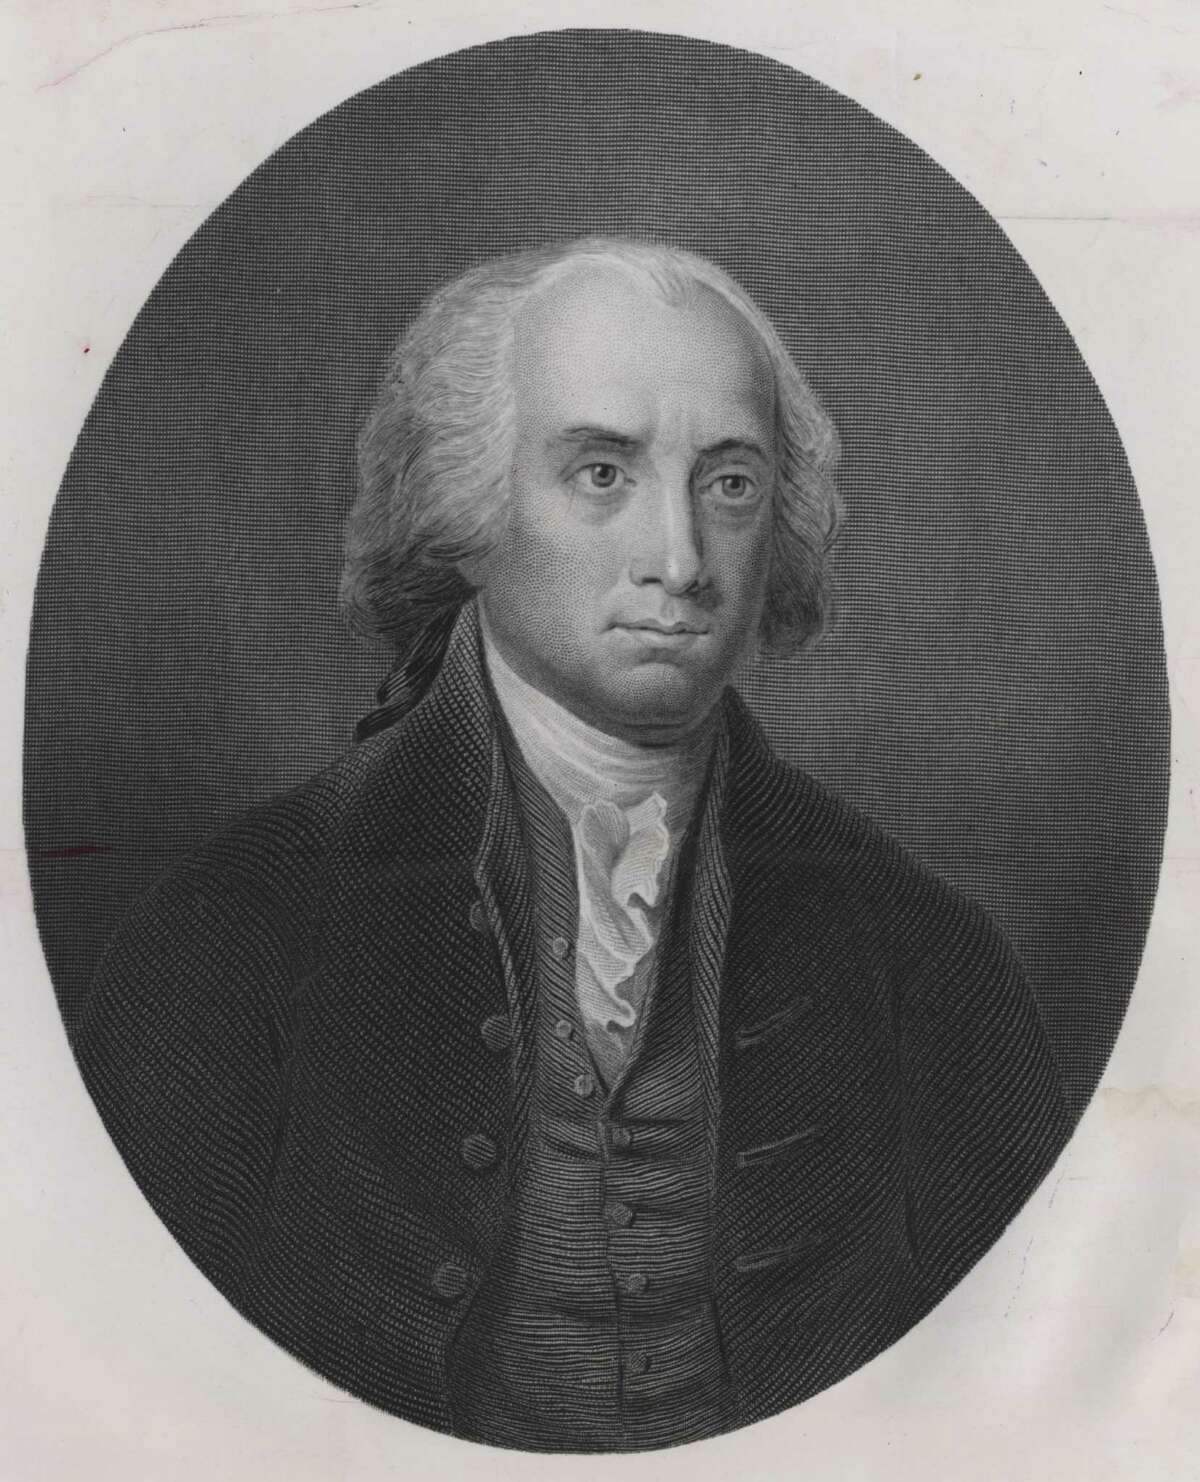 This etching shows President James Madison during his years in the White House.